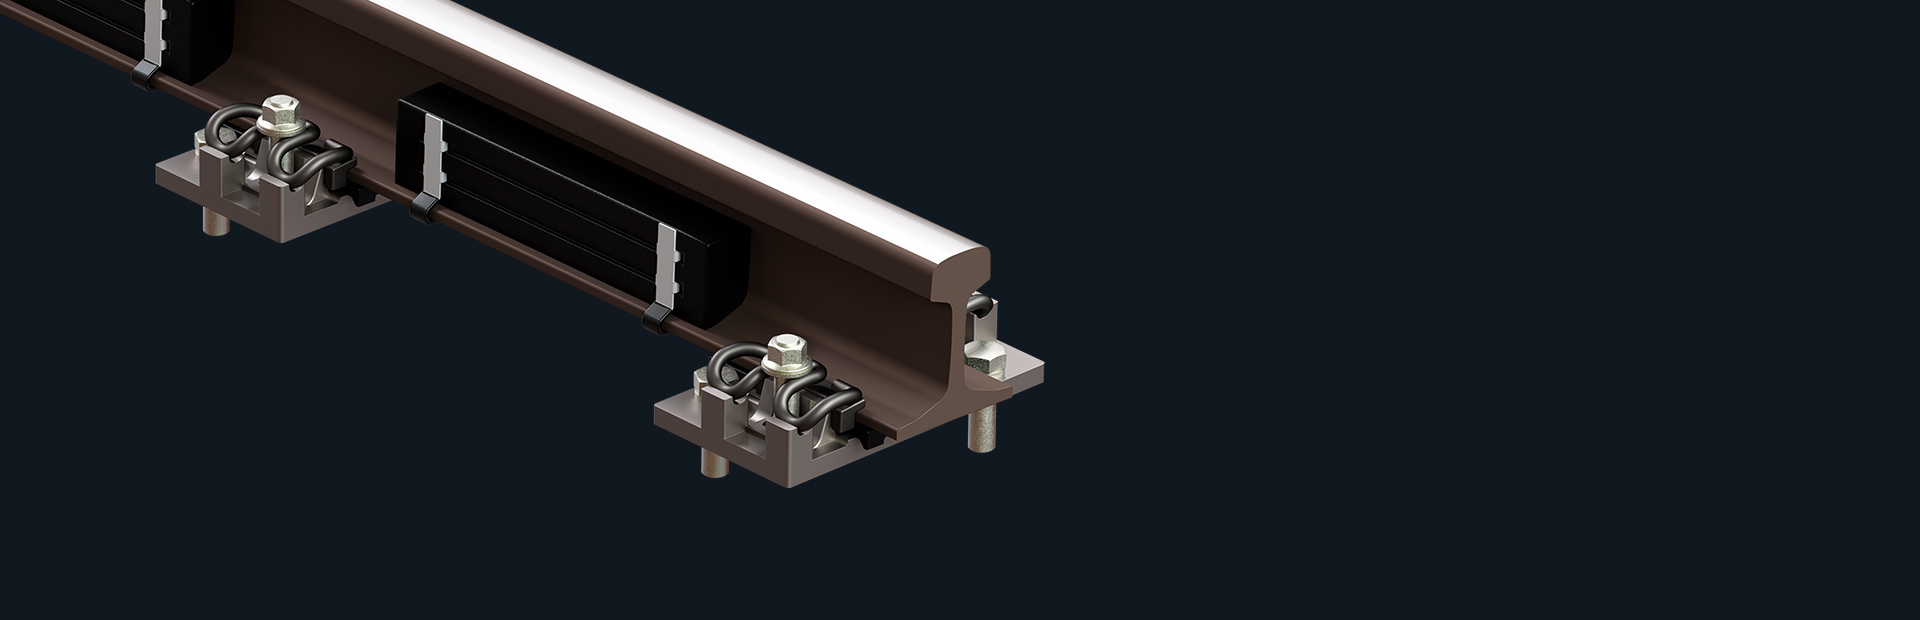 tiantie-group_products_rail-damper_separator-image_1920x1080